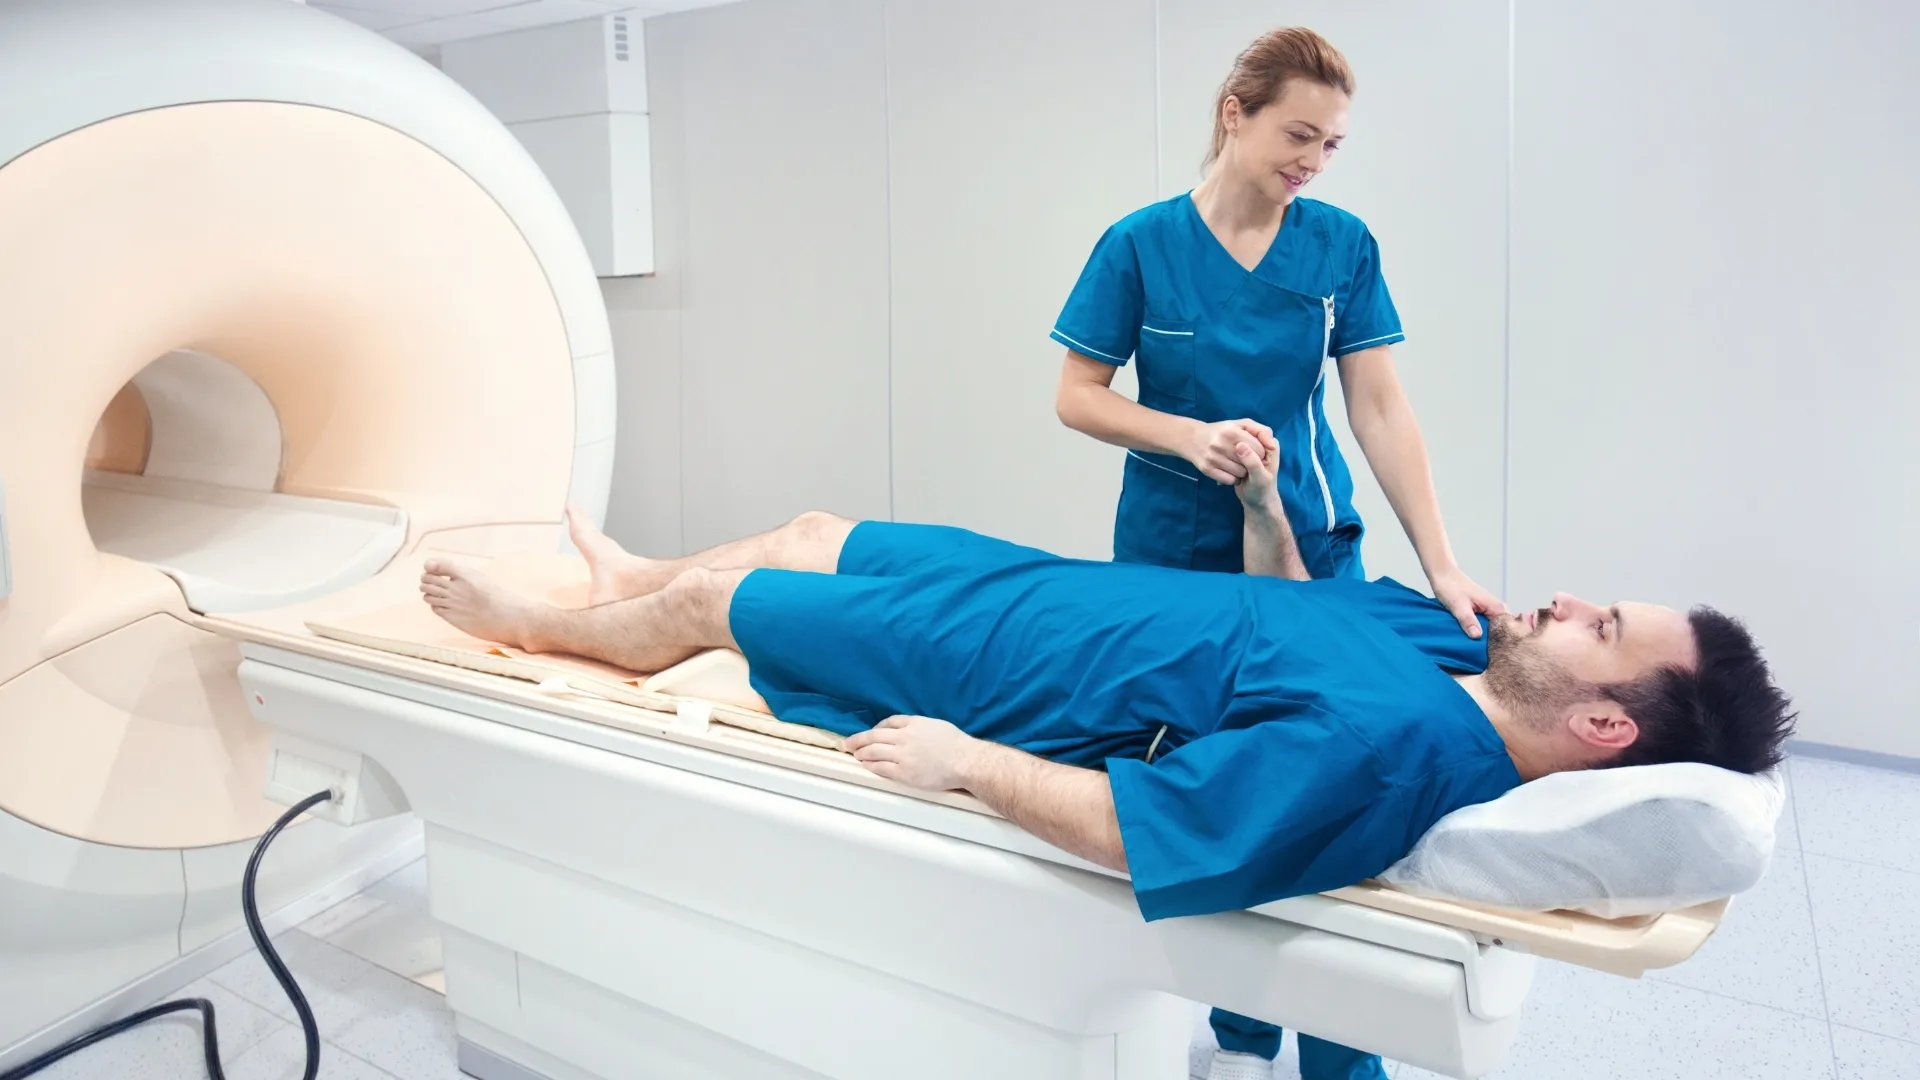 Is a Full-Body Scan a Good Stop on the Road to Wellness?